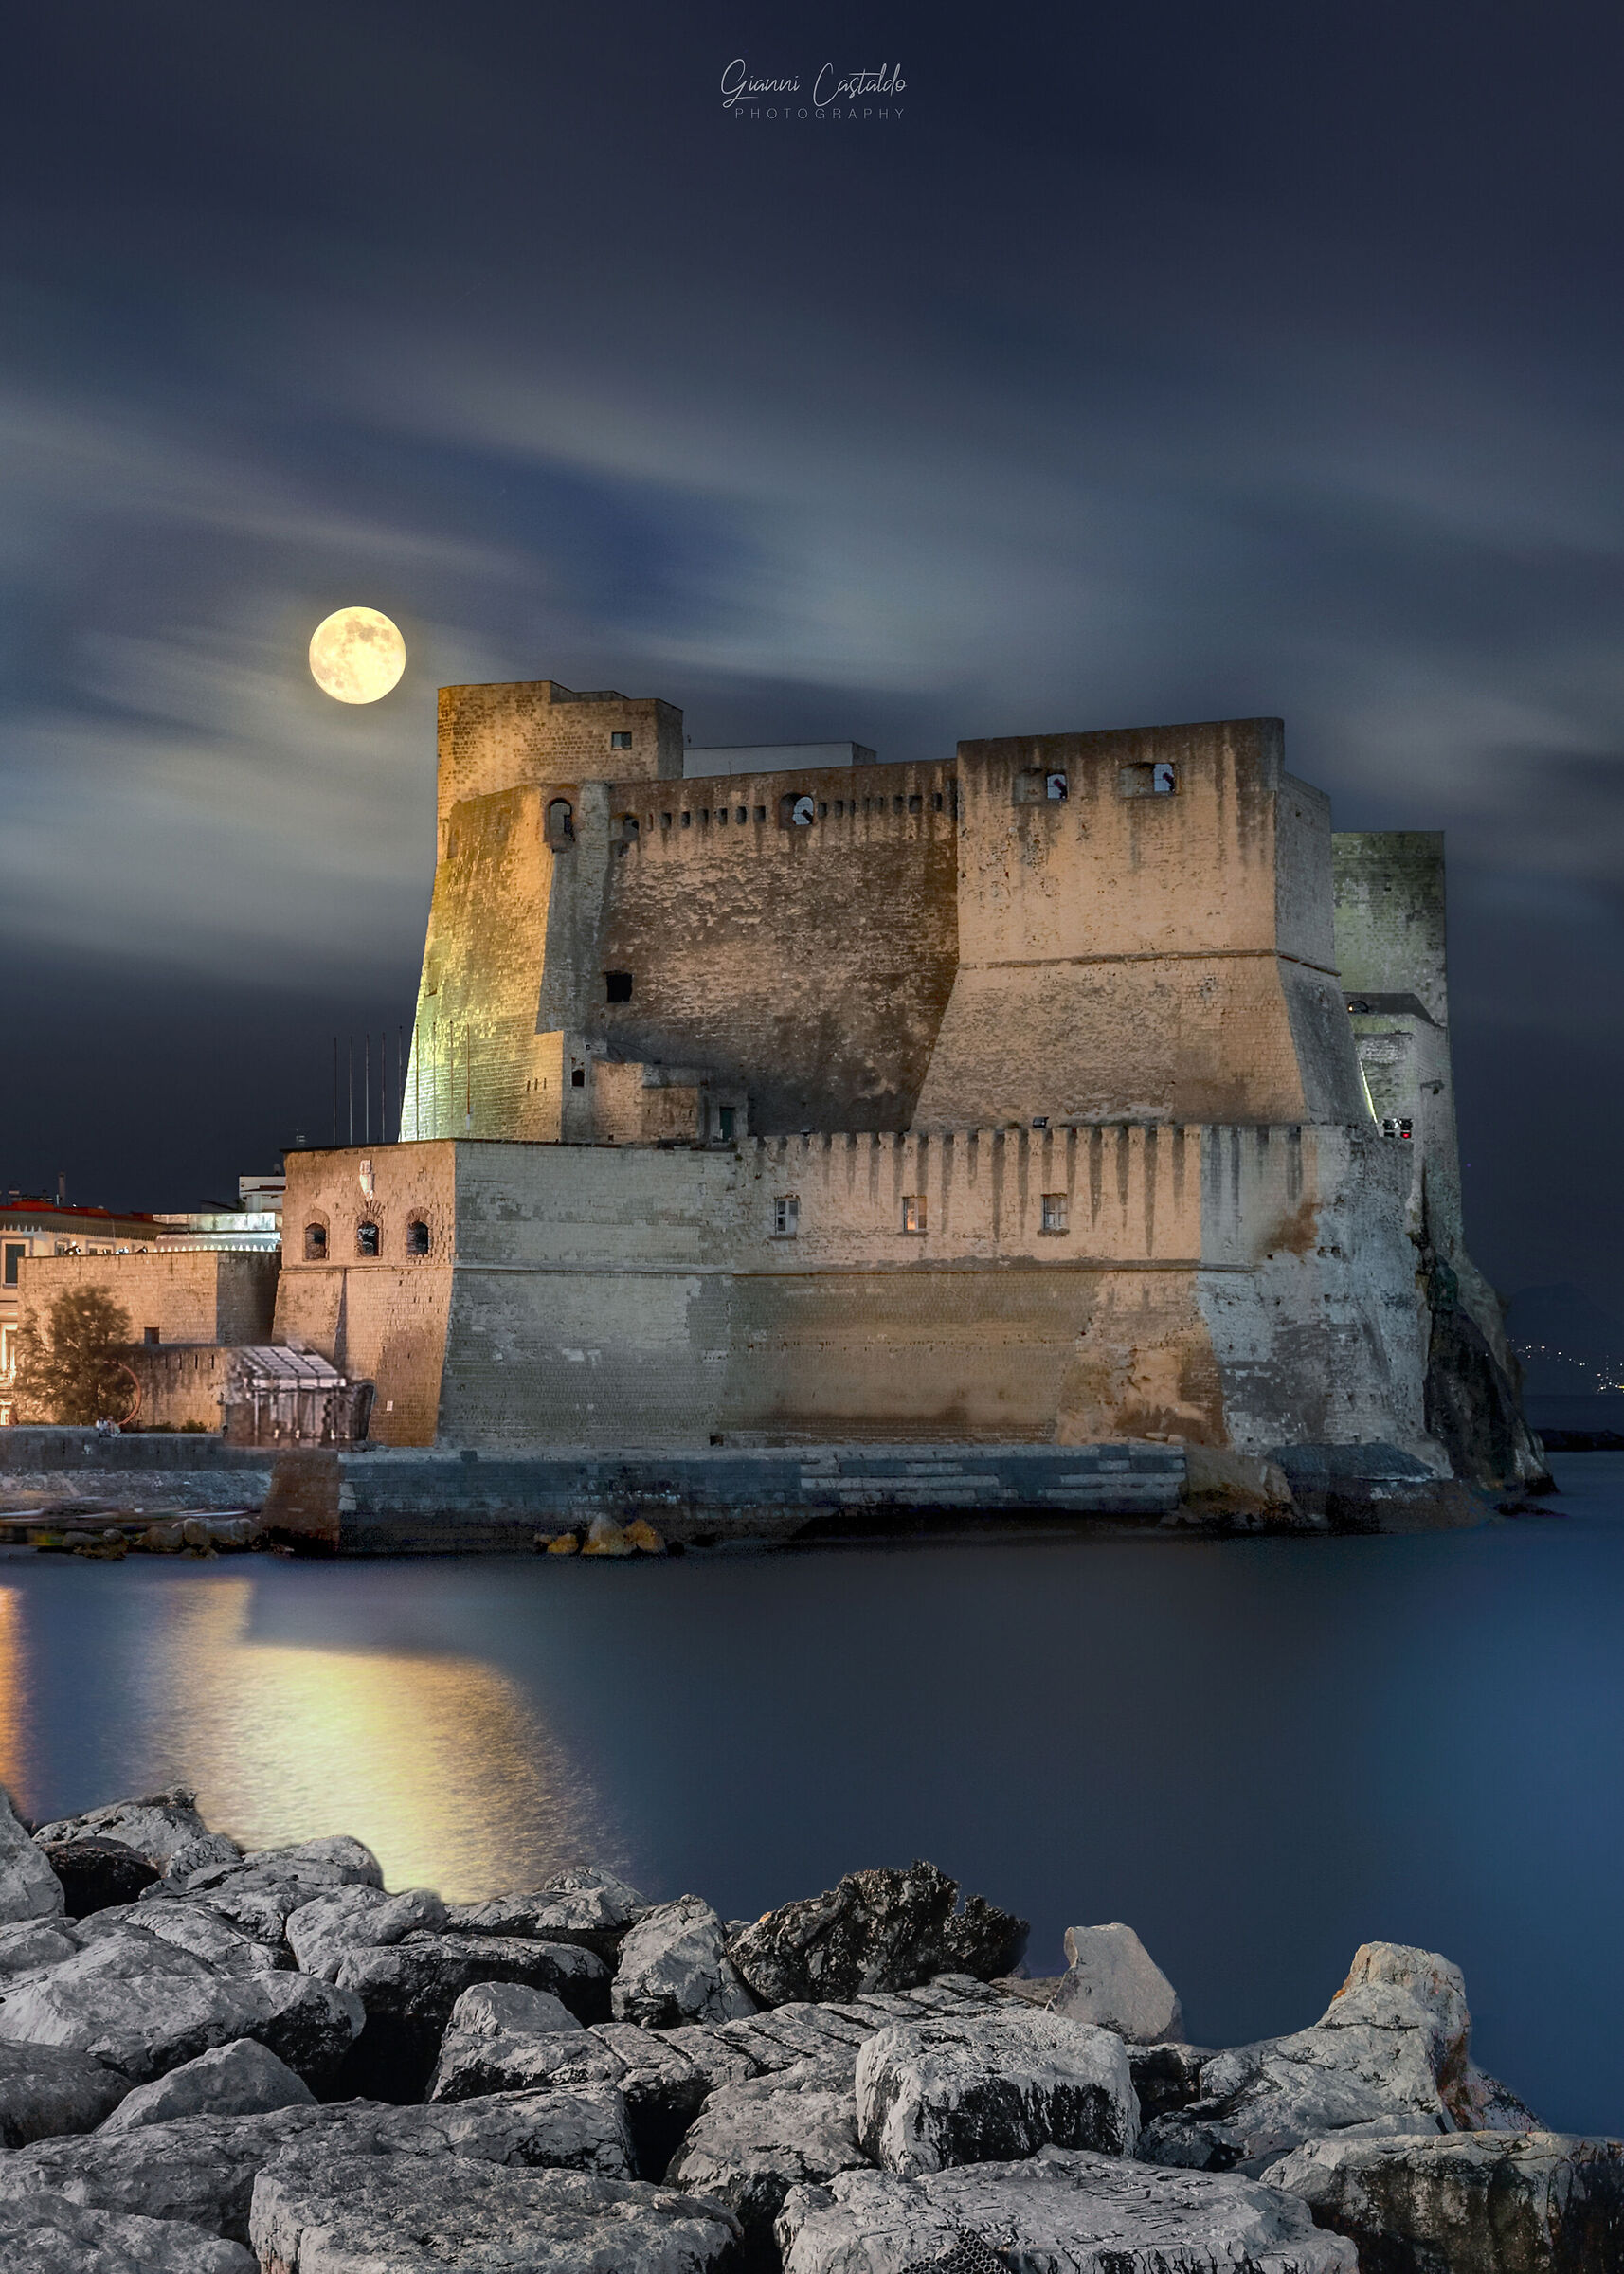 Between myth and legend the Castel dell'Ovo...